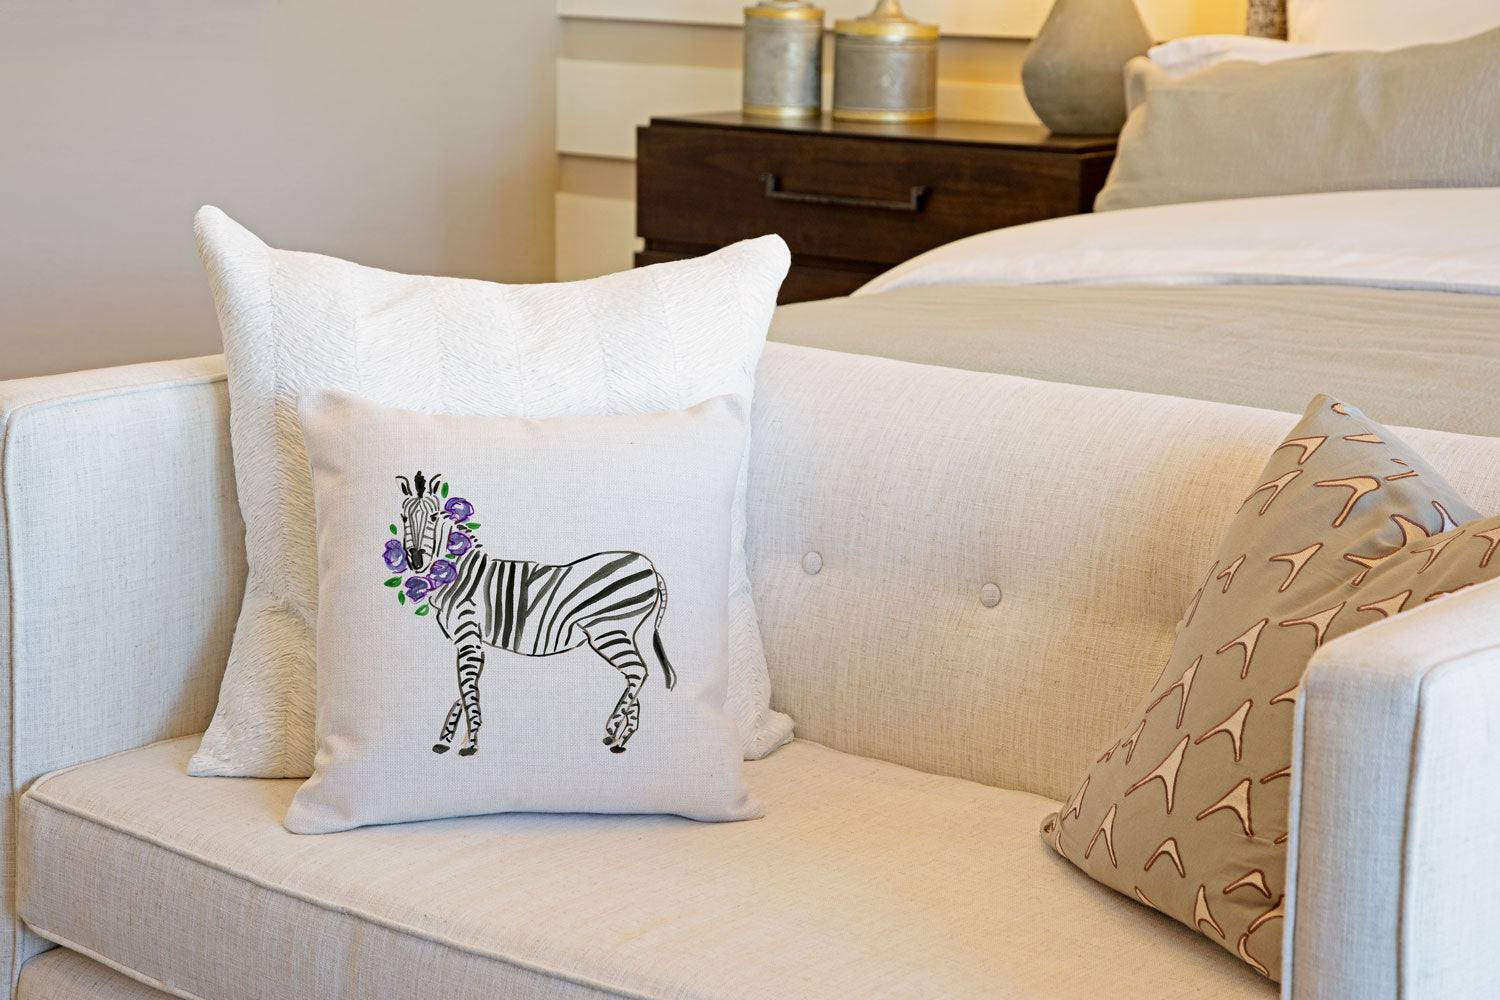 Zelda Zebra Throw Pillow Cover - Animal Illustrations Throw Pillow Cover Collection-Di Lewis